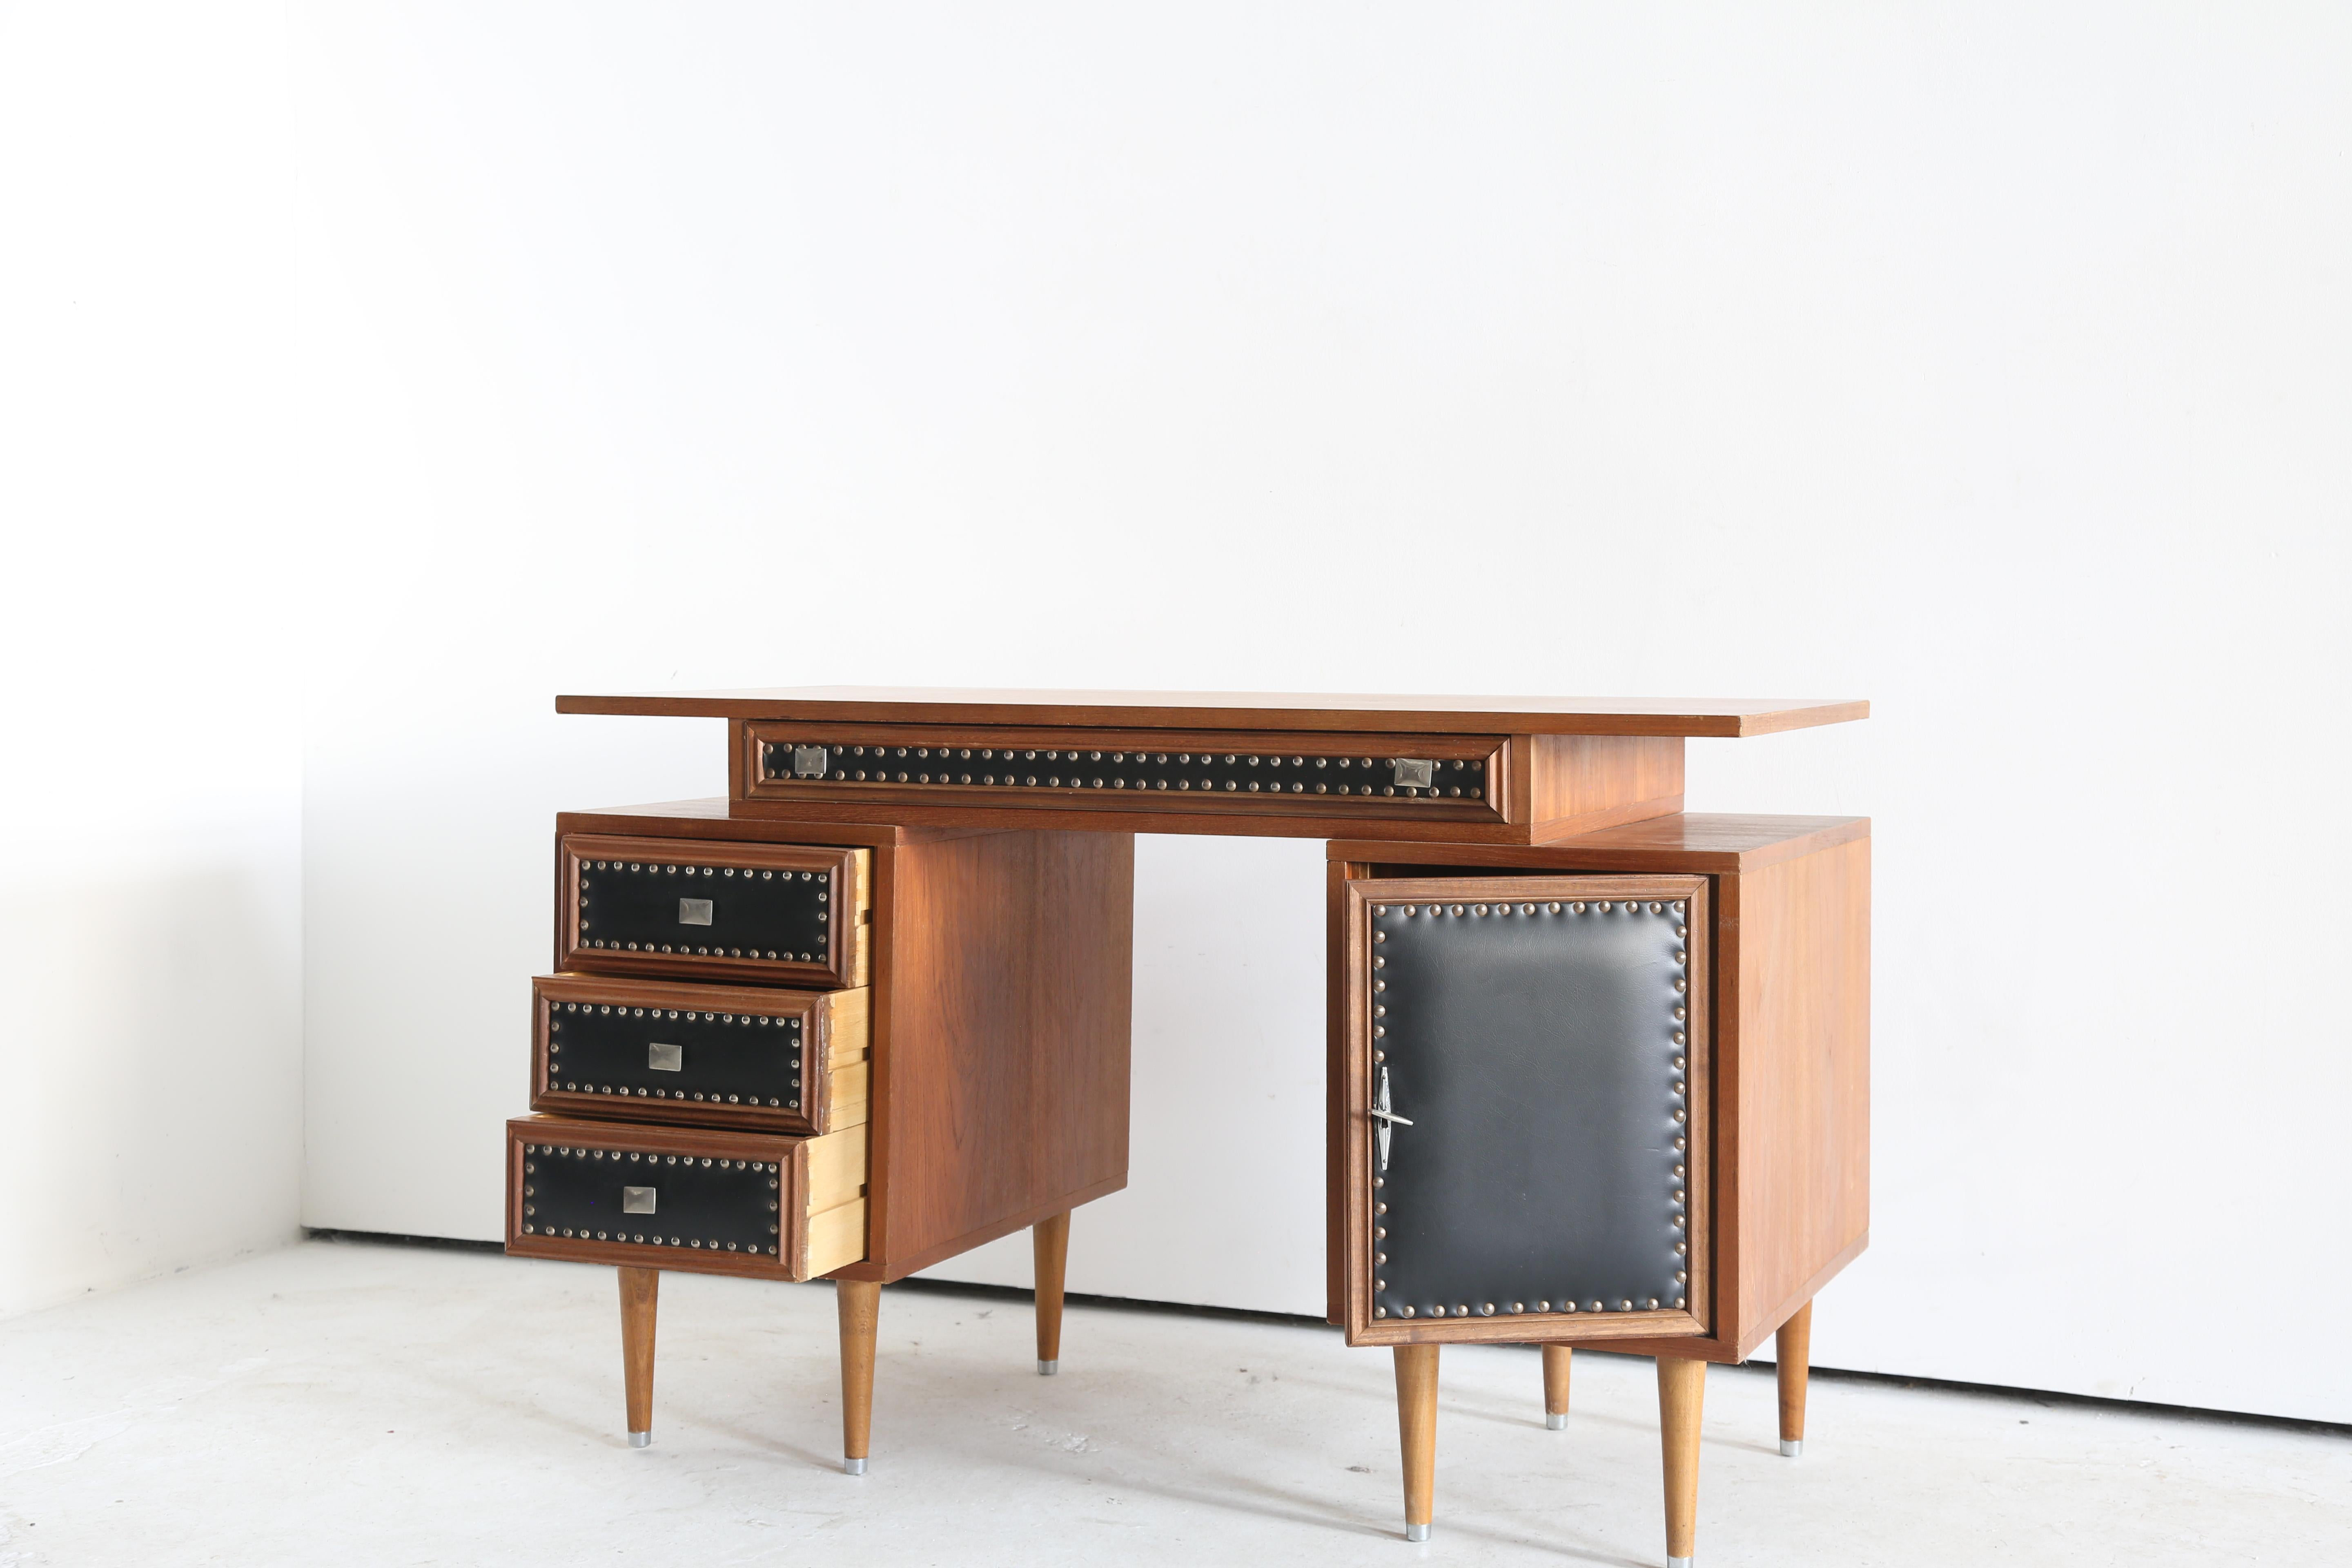 Seventies Studded Teak Desk In Good Condition For Sale In London, England